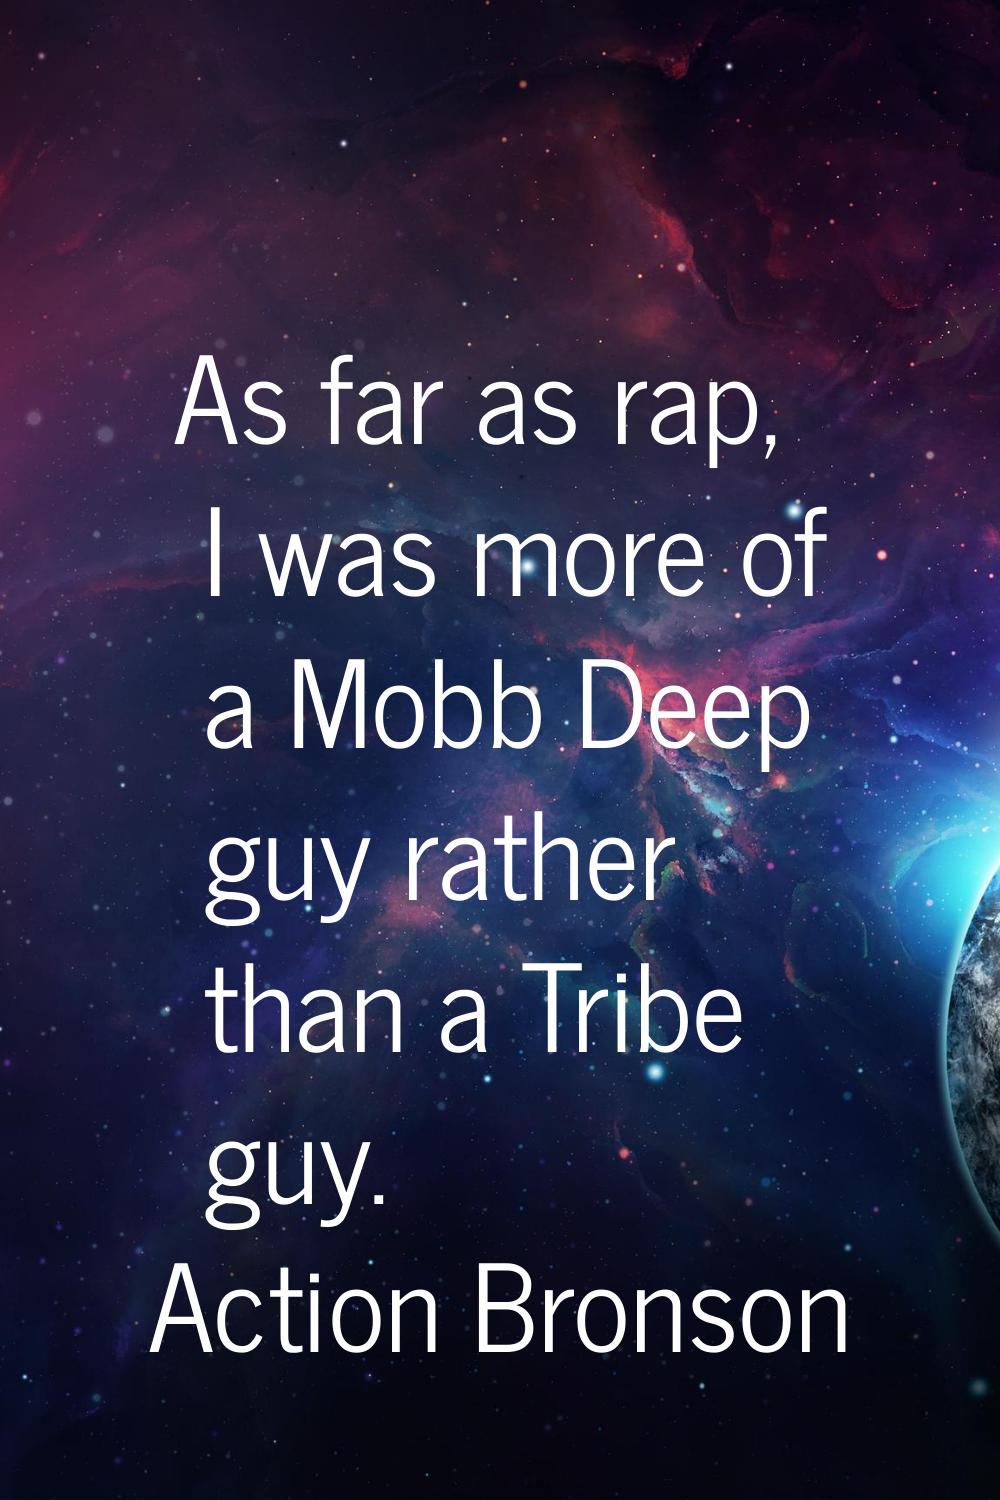 As far as rap, I was more of a Mobb Deep guy rather than a Tribe guy.